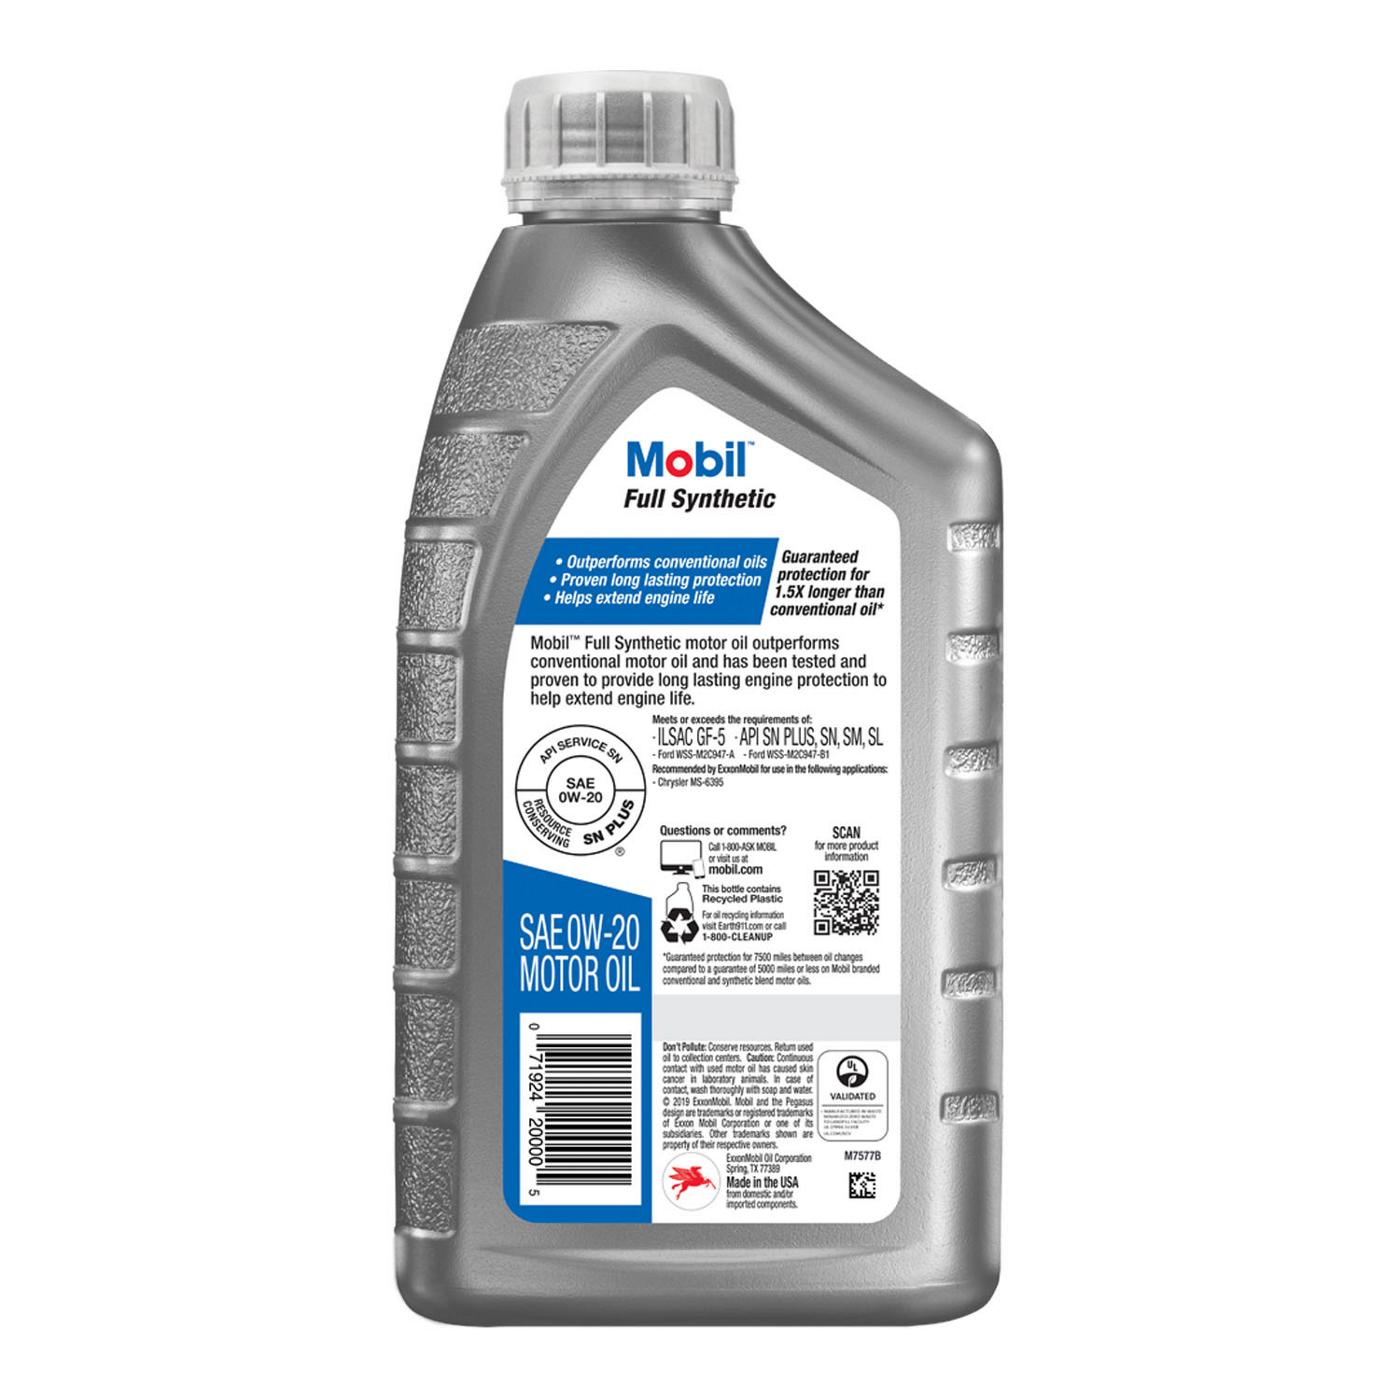 Mobil Full Synthetic Motor Oil 0W-20; image 2 of 2